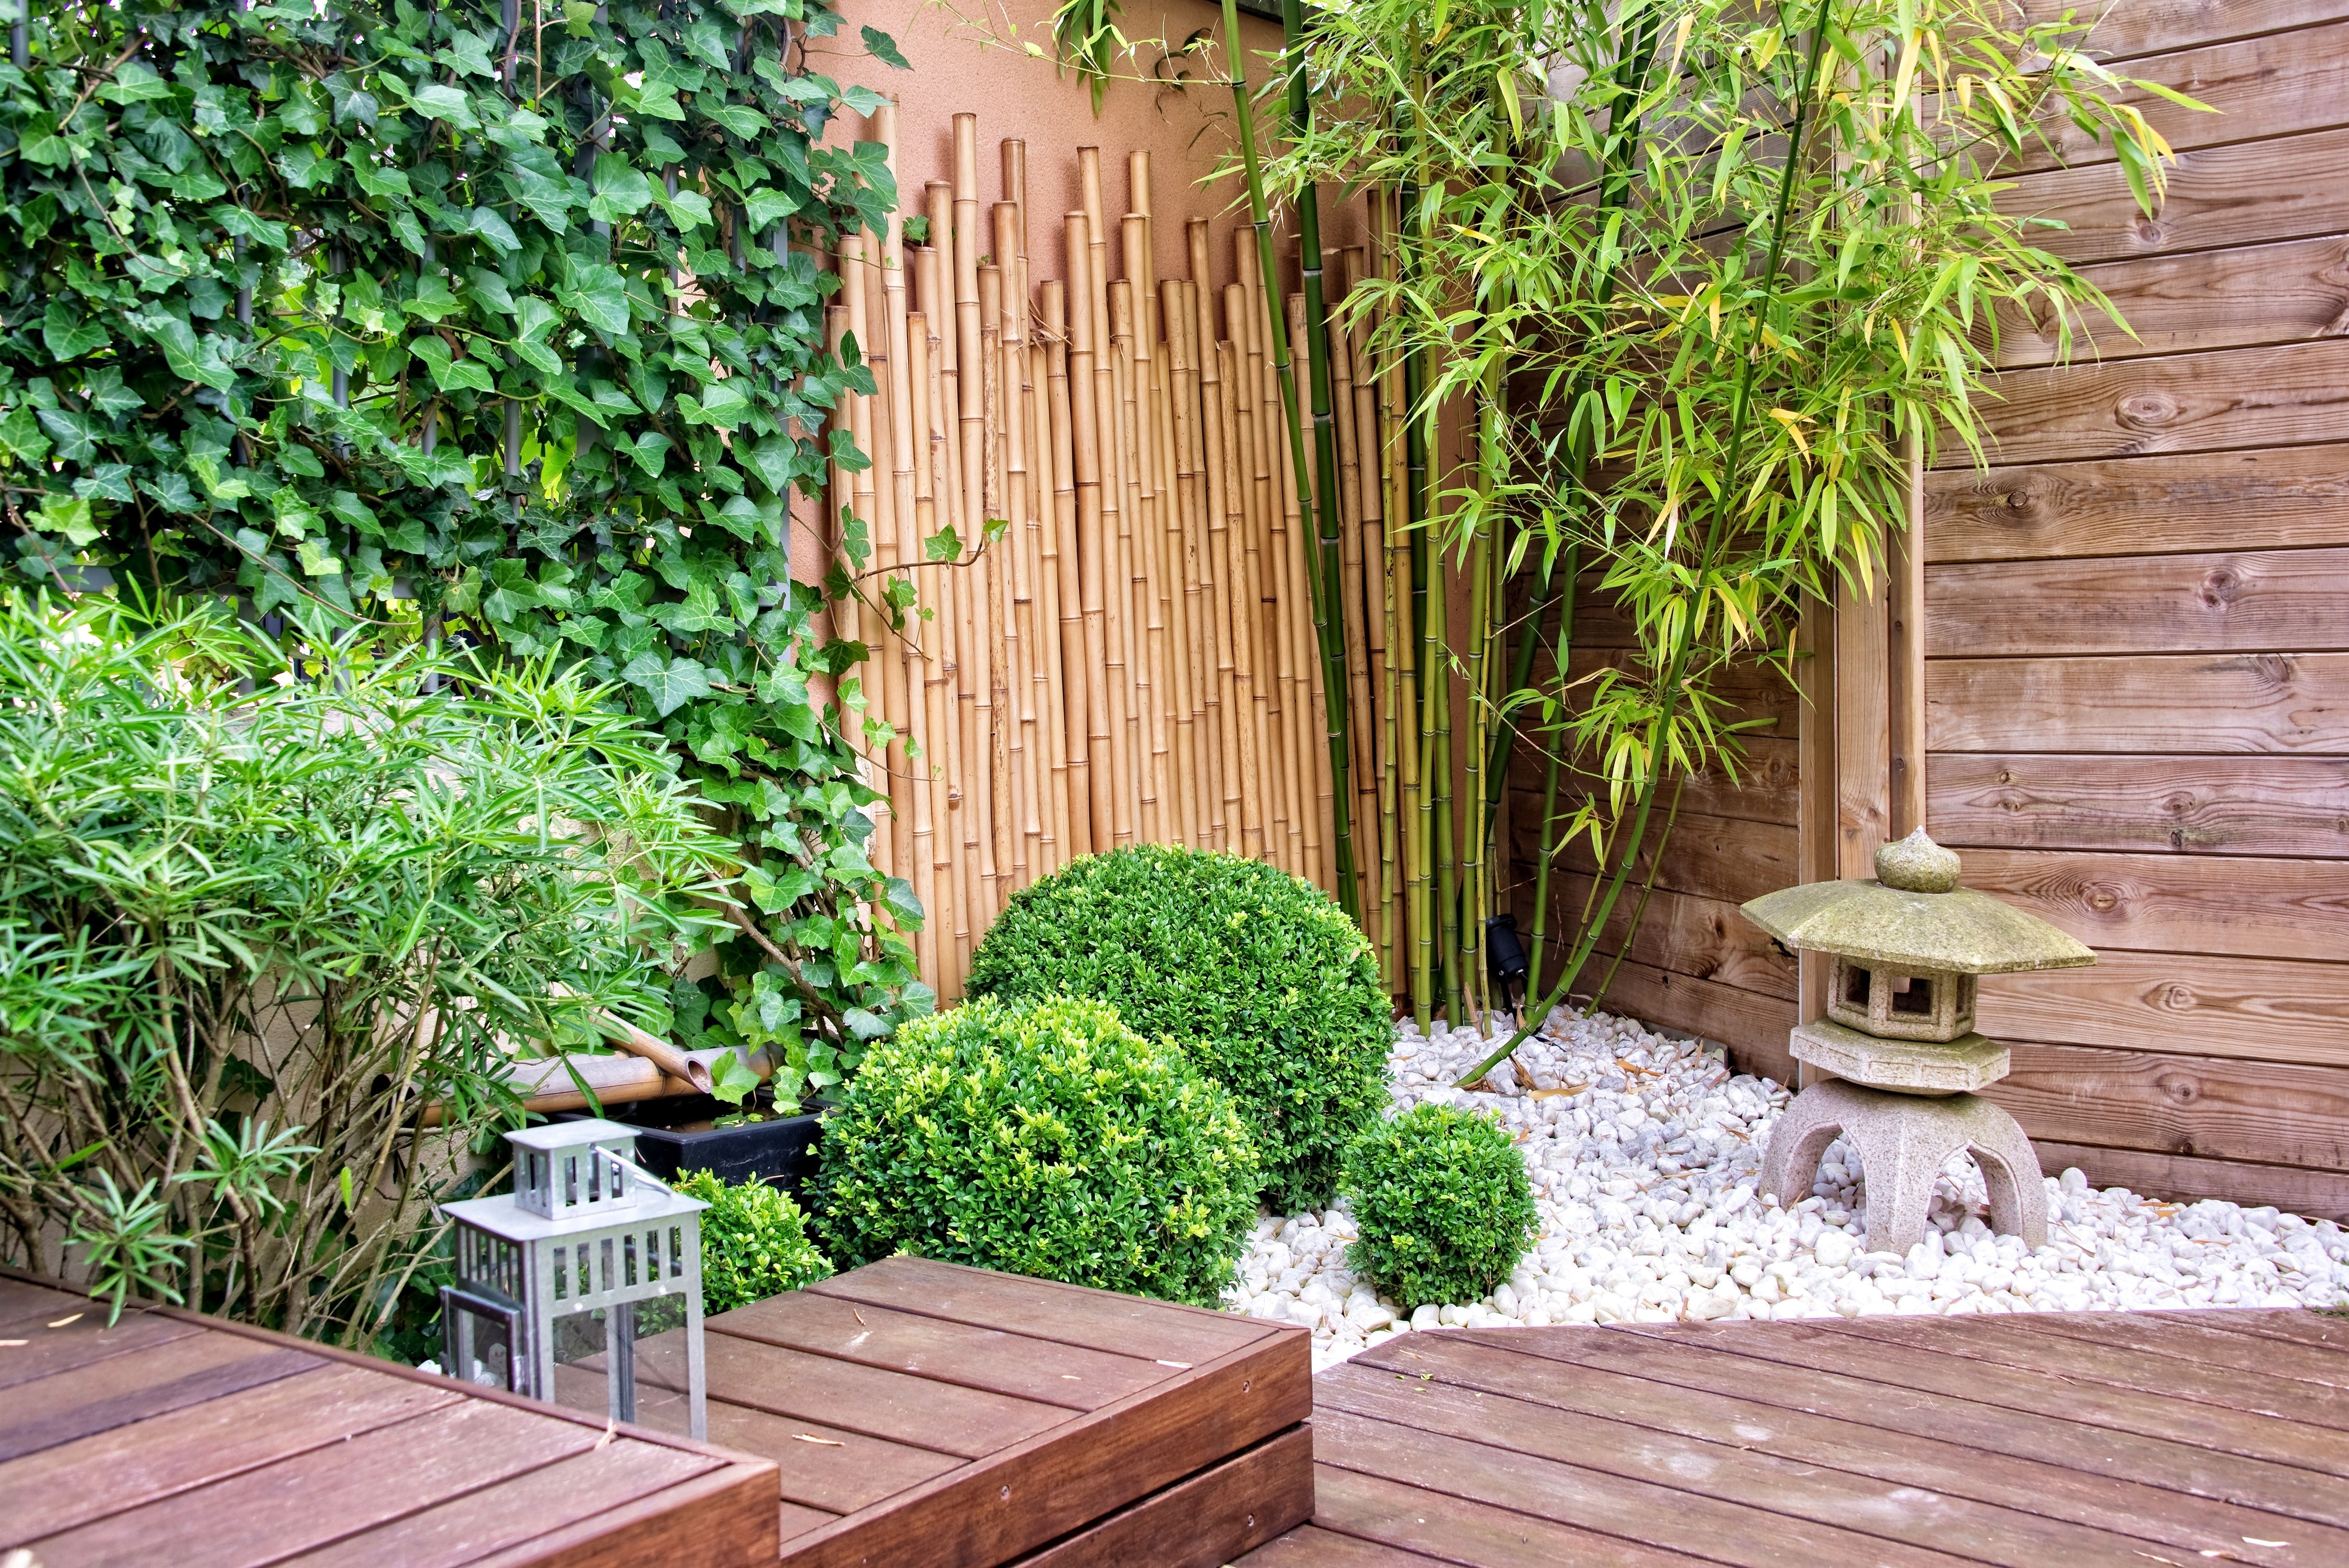 small corner ideas on a budget with natural elements for a zen inspired garden